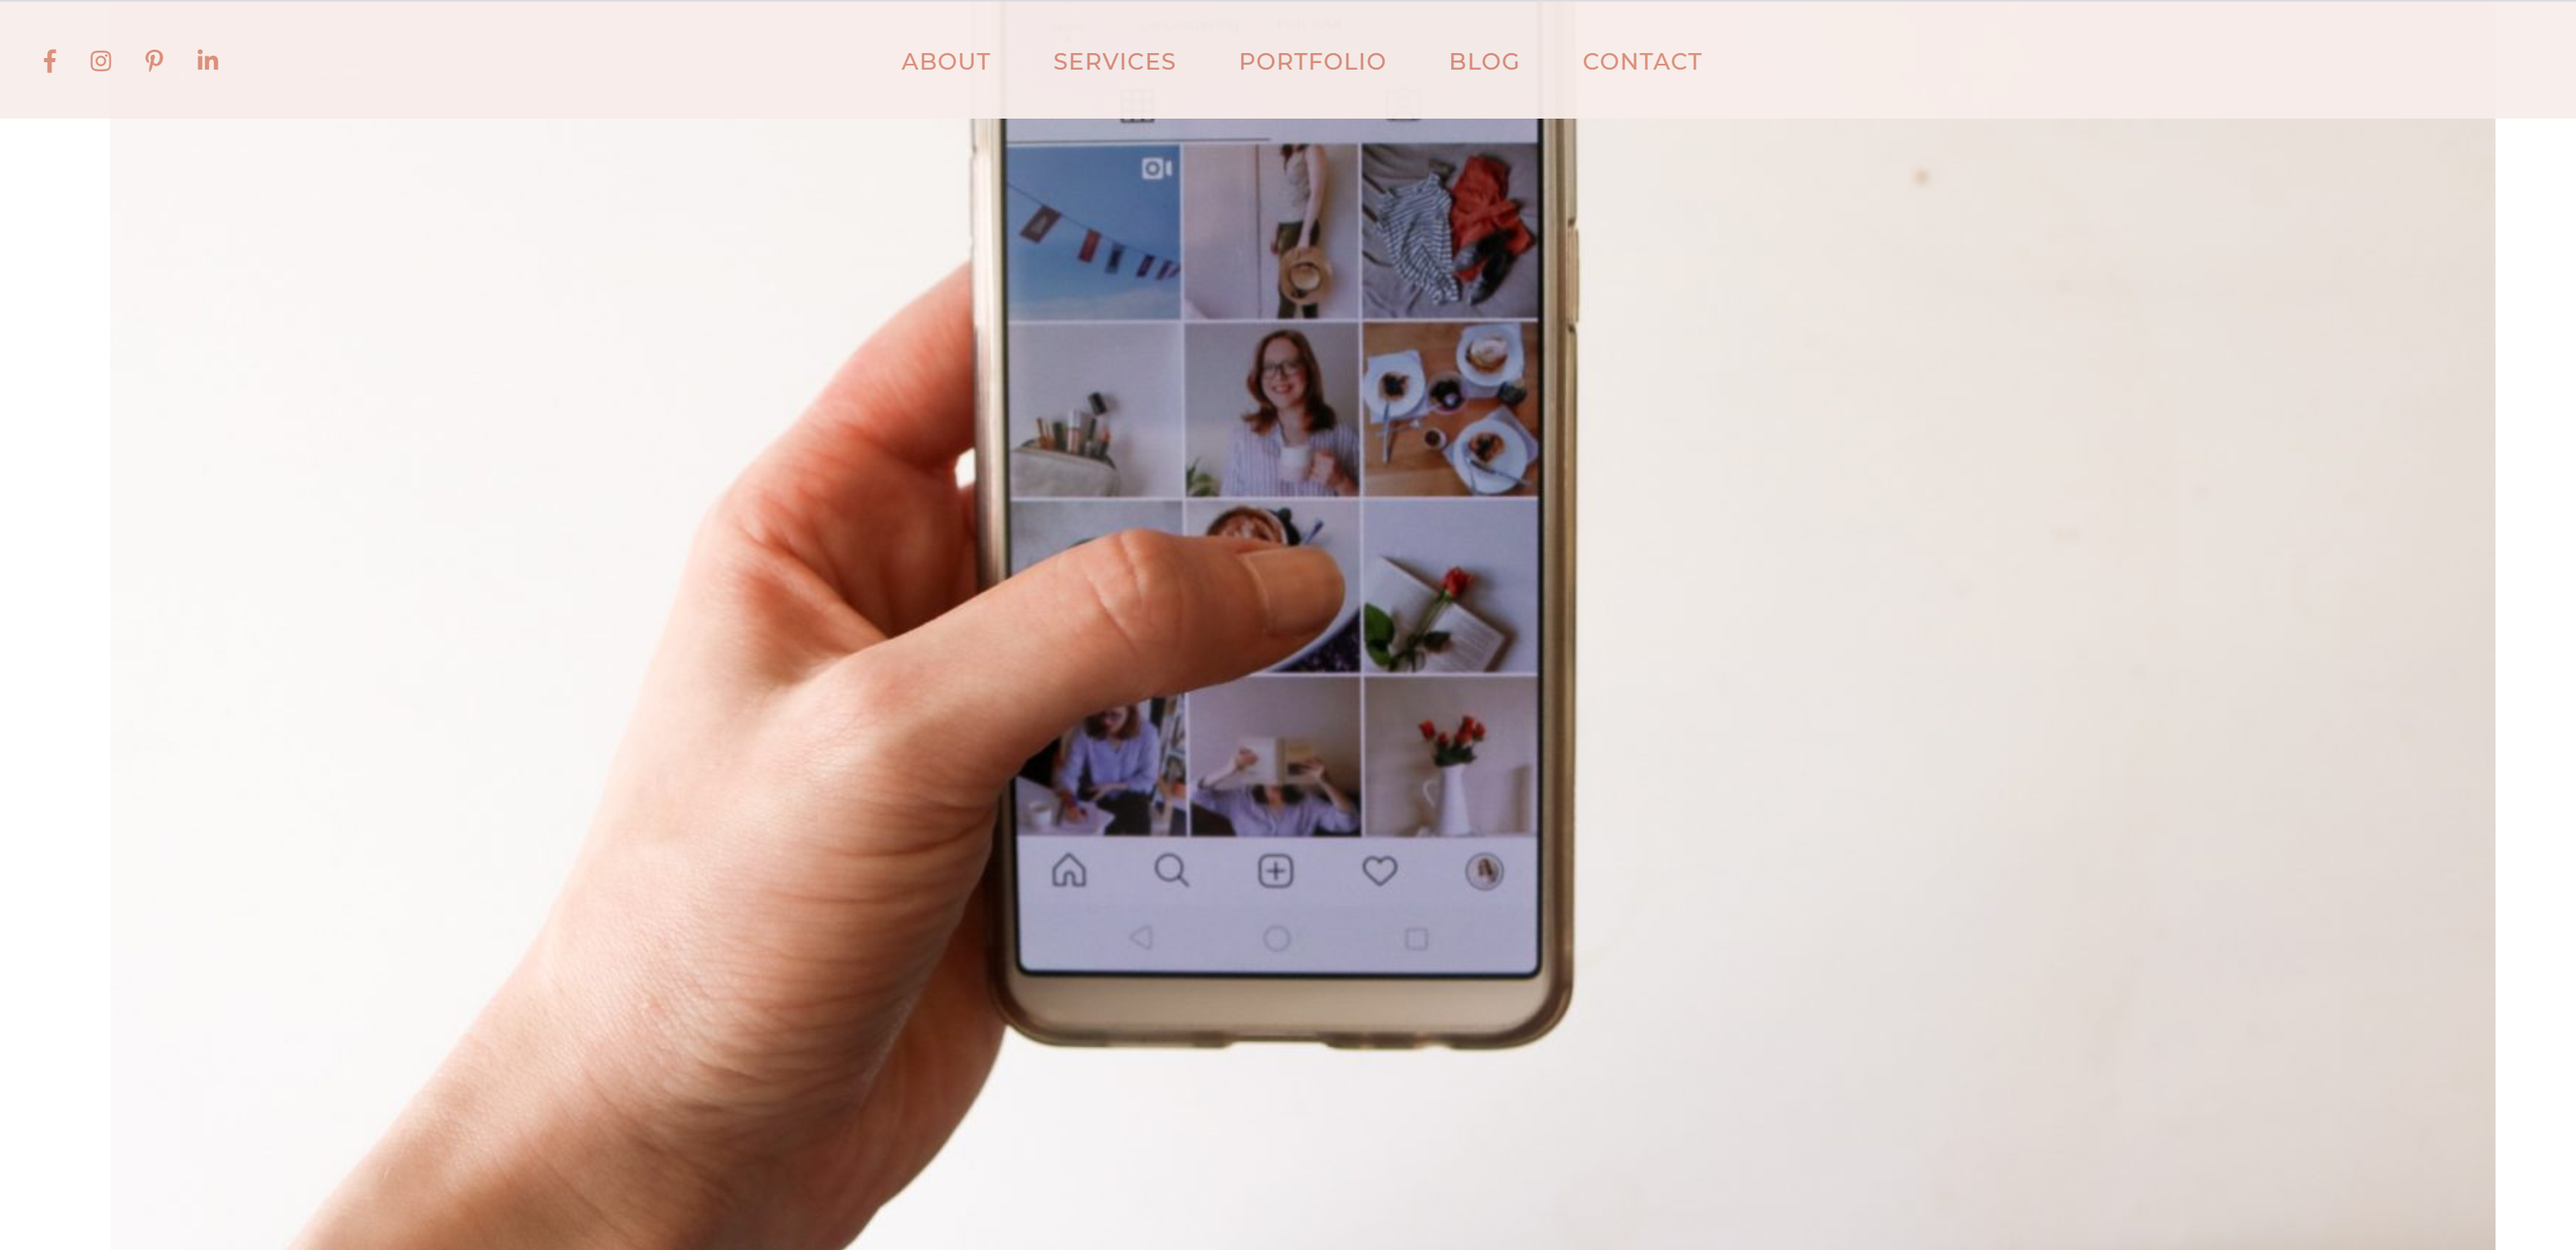 THE FOUR BEST INSTAGRAM APPS TO BOOST ENGAGEMENT